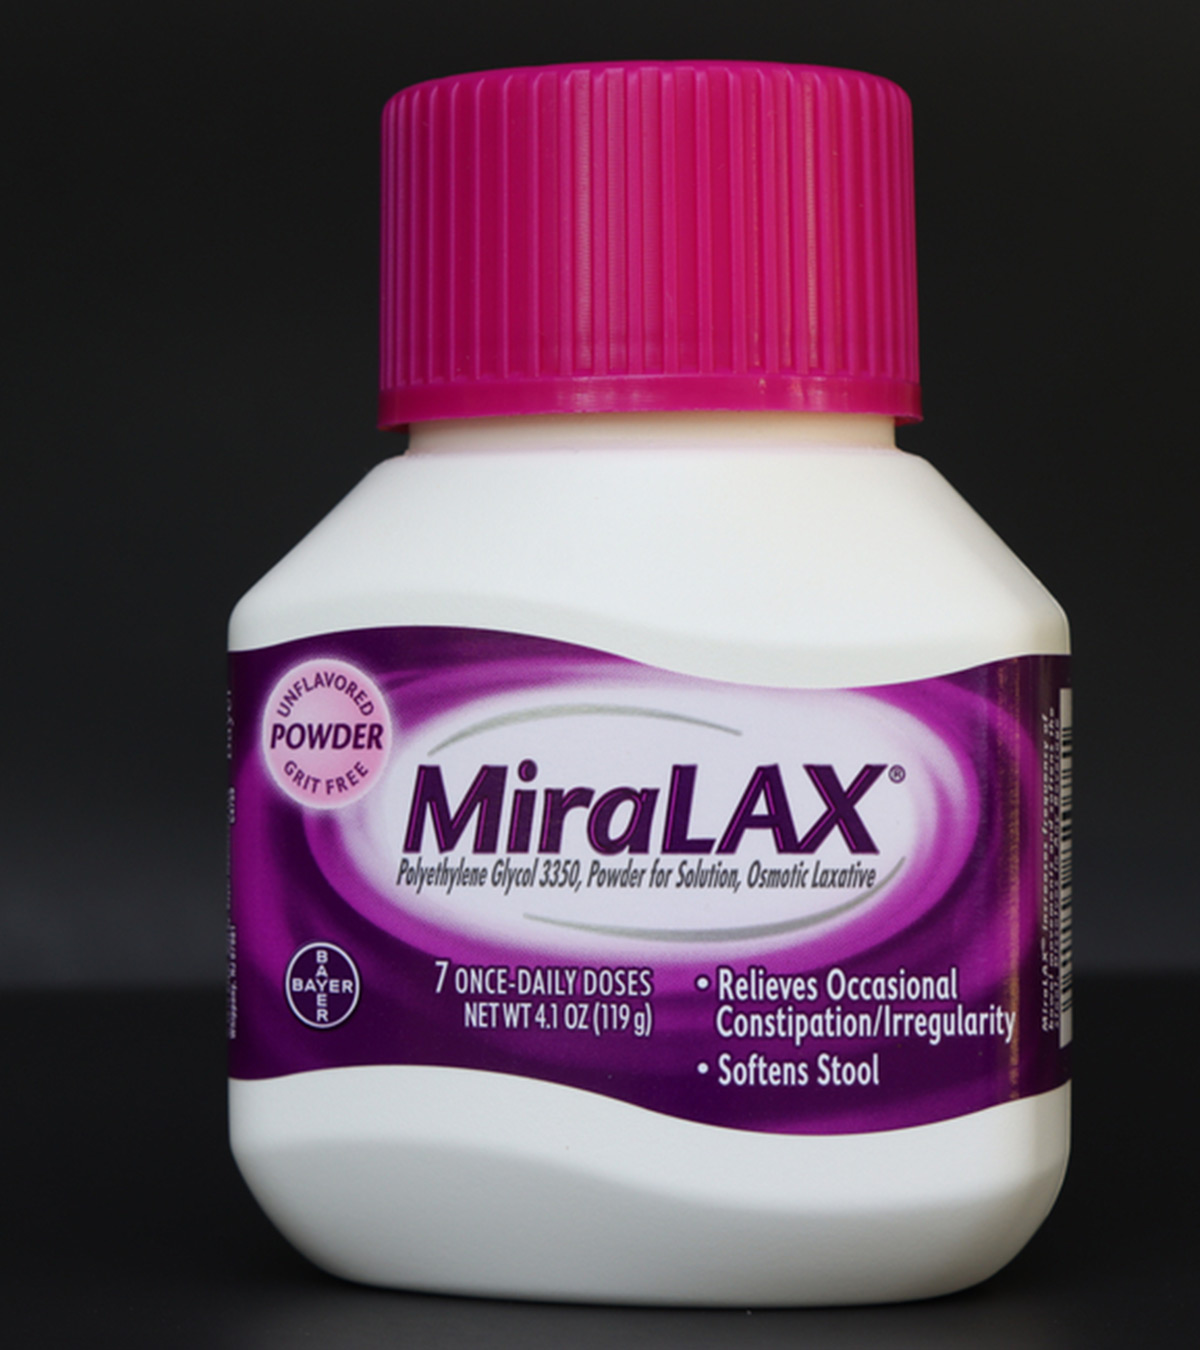 Miralax For Kids: Safety Concerns, Dosage And Side Effects